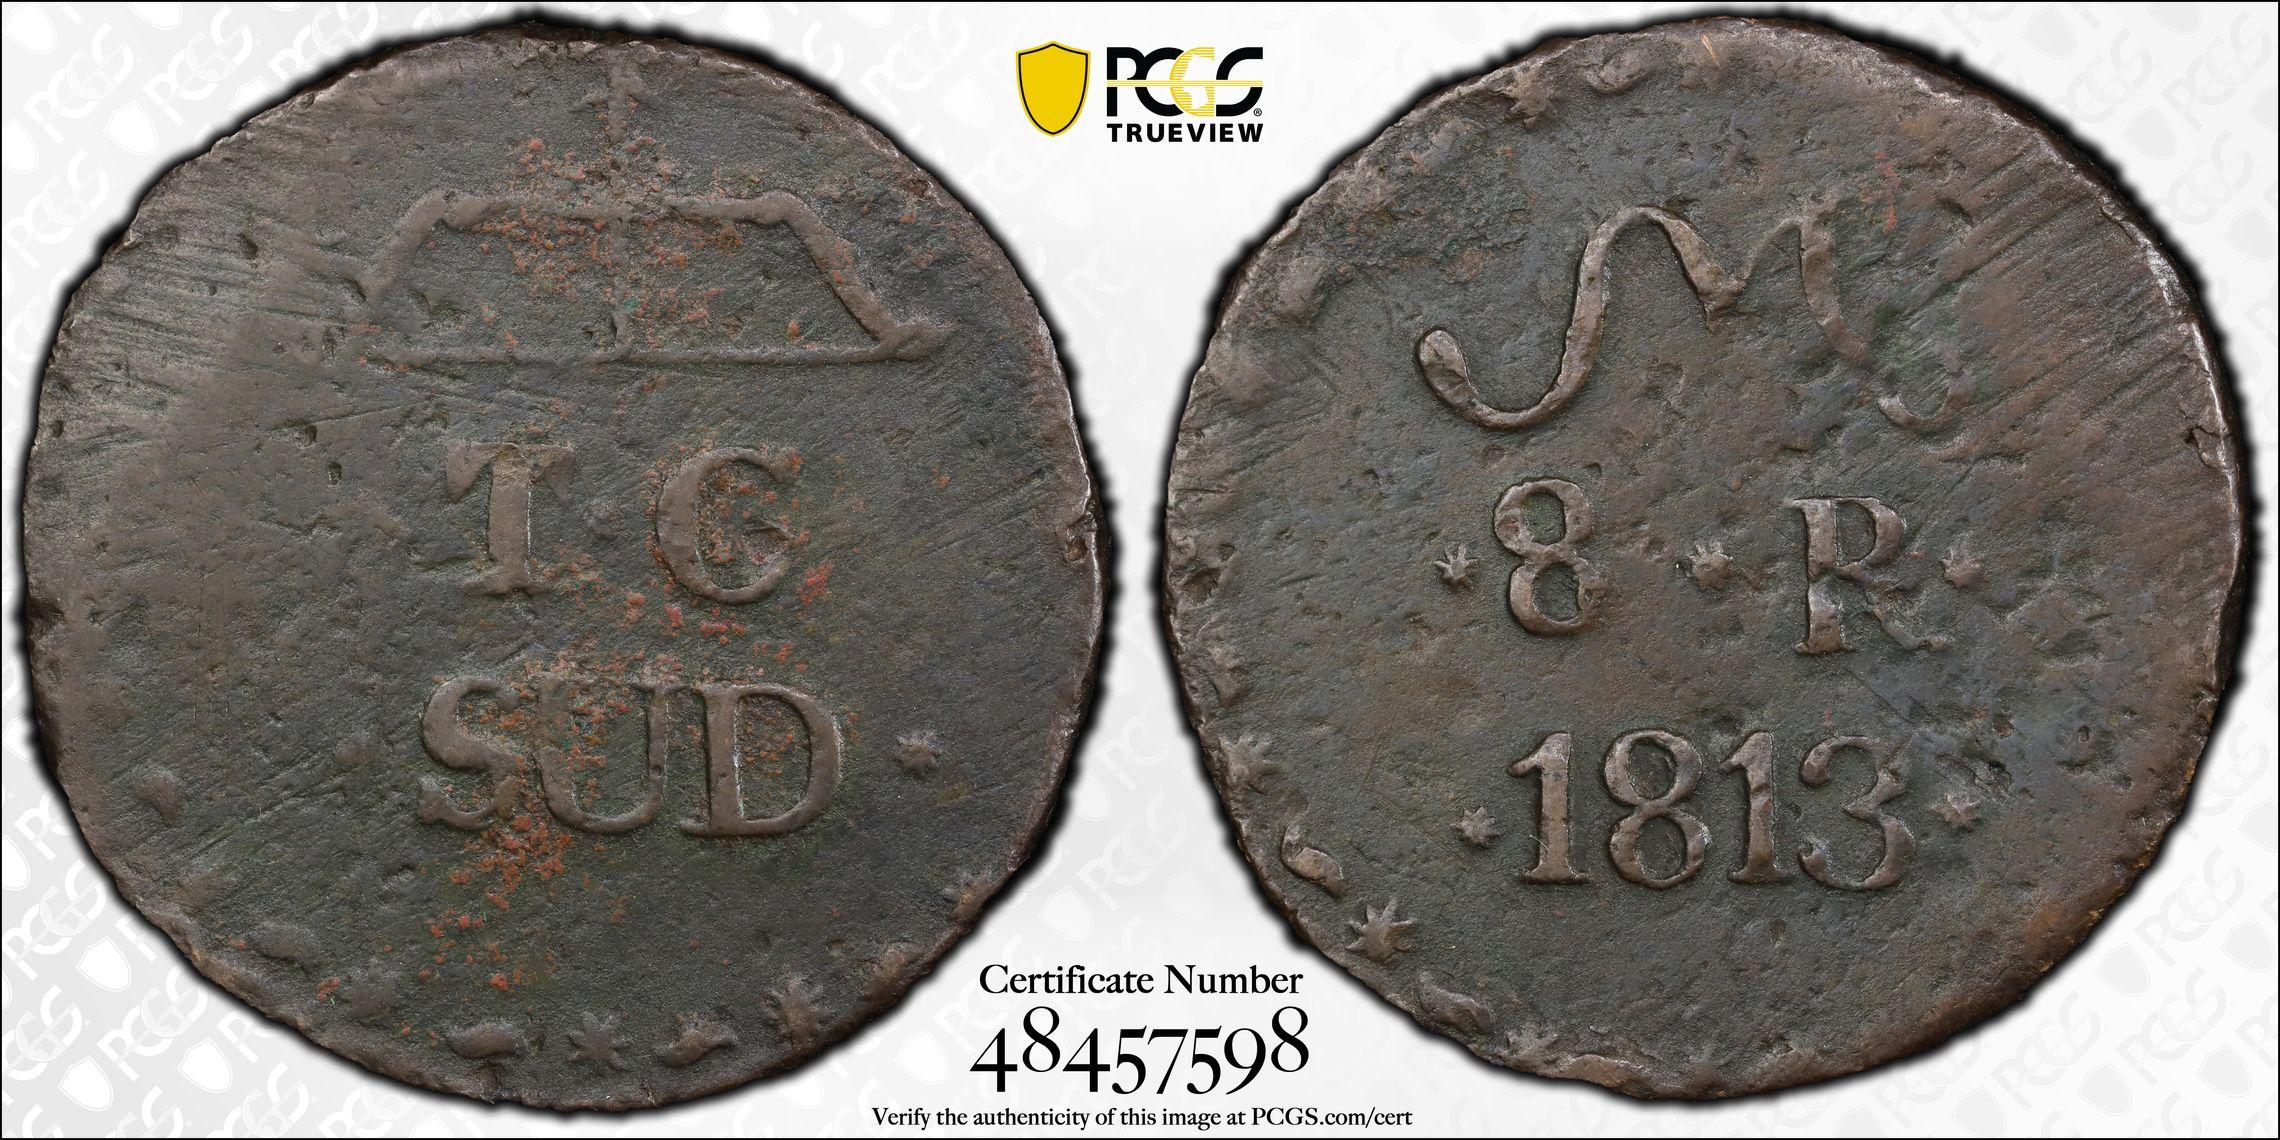 Certified 1813 Mexico Morales SUD Oaxaca copper 8 real